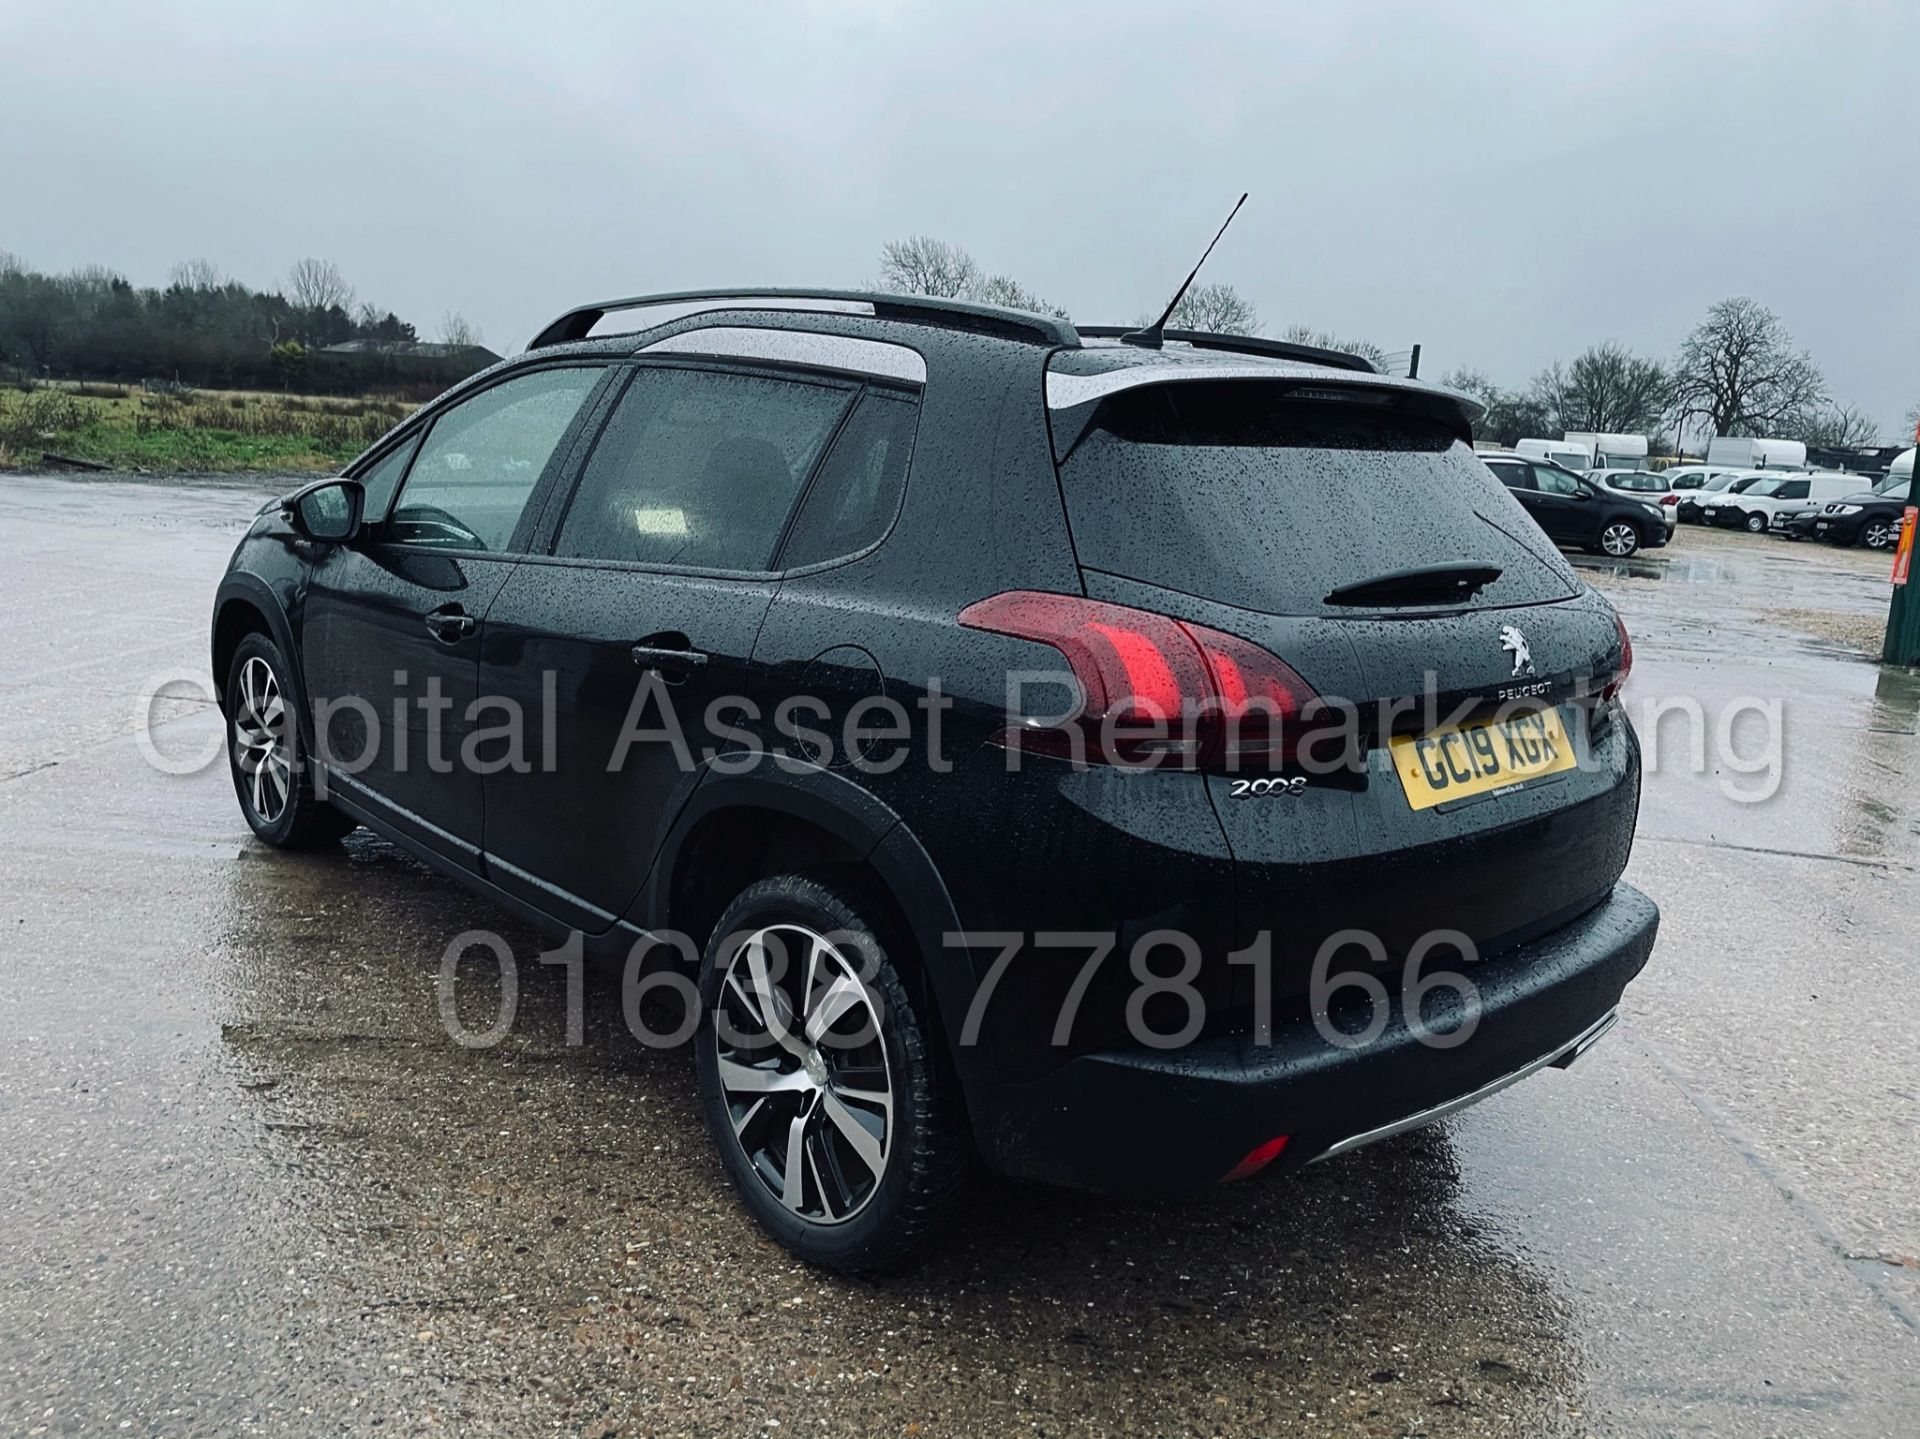 PEUGEOT 2008 *GT LINE* SUV / MPV (2019 - EURO 6) '1.5 BLUE HDI' *SAT NAV - PAN ROOF' *LOW MILES* - Image 10 of 46